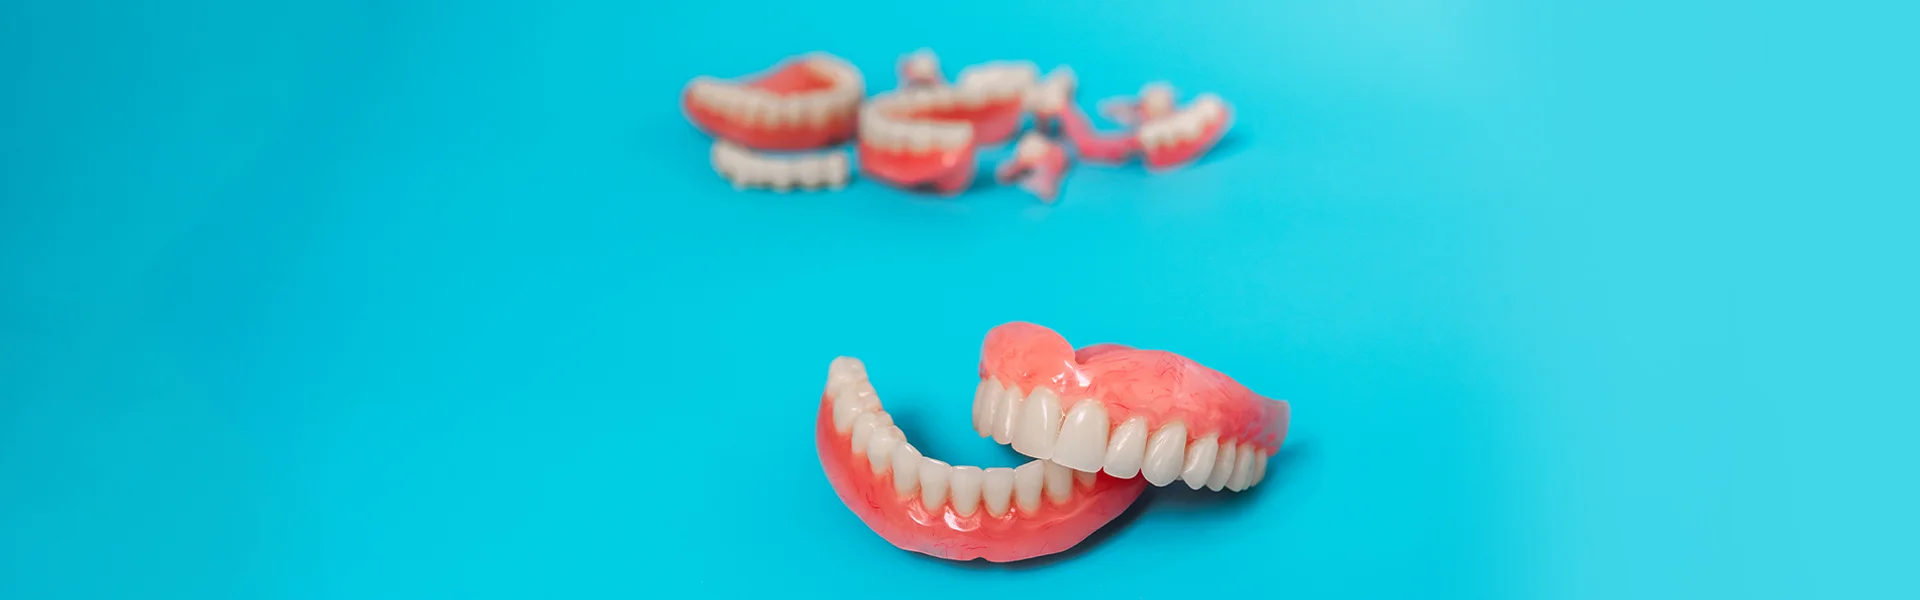 What Is the Role of Dentures in Facial Structure and Appearance?